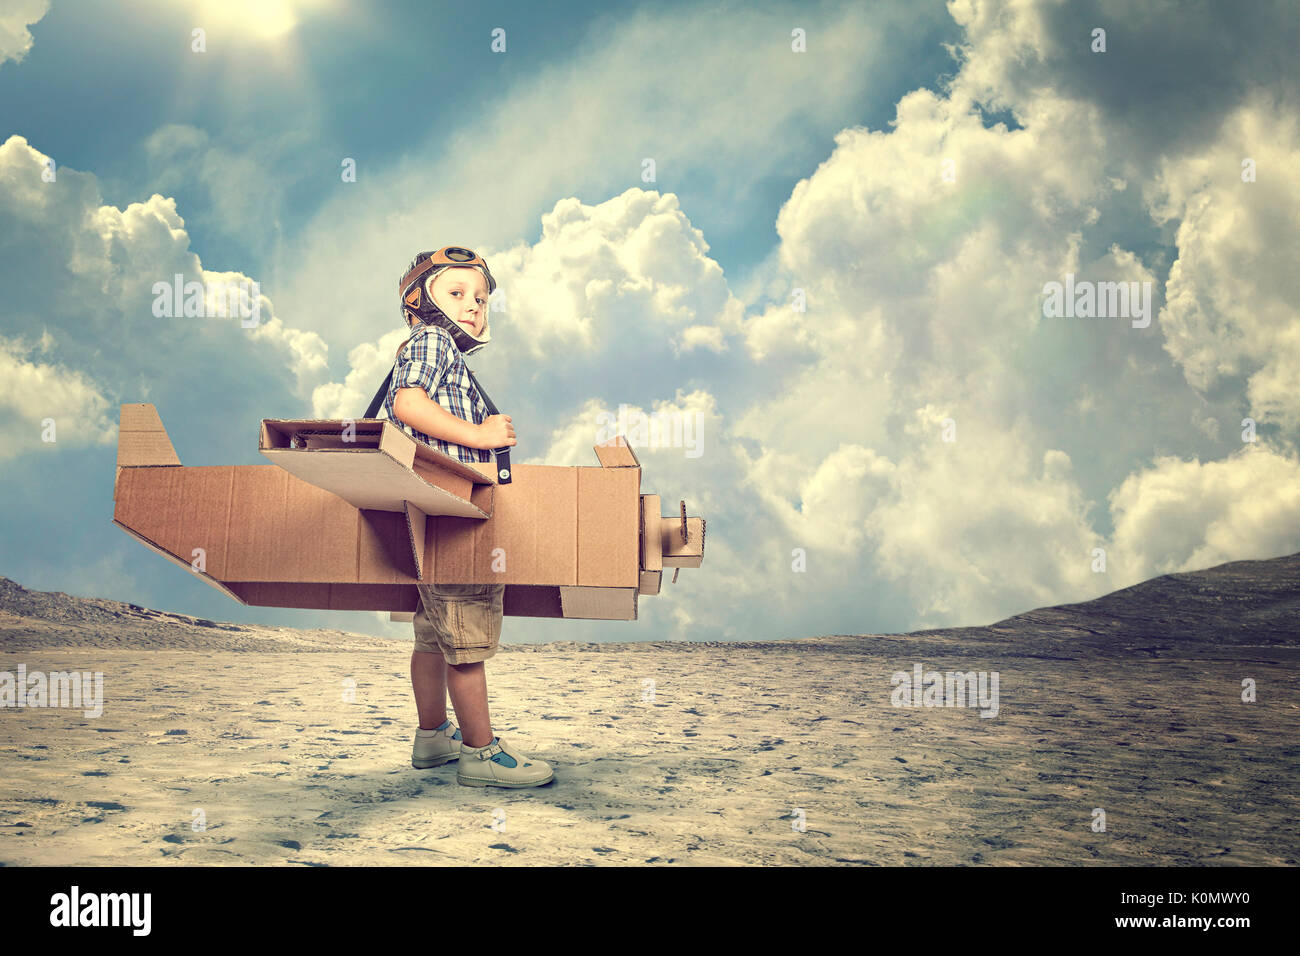 portrait of child play with cardboard airplane in a desert Stock Photo